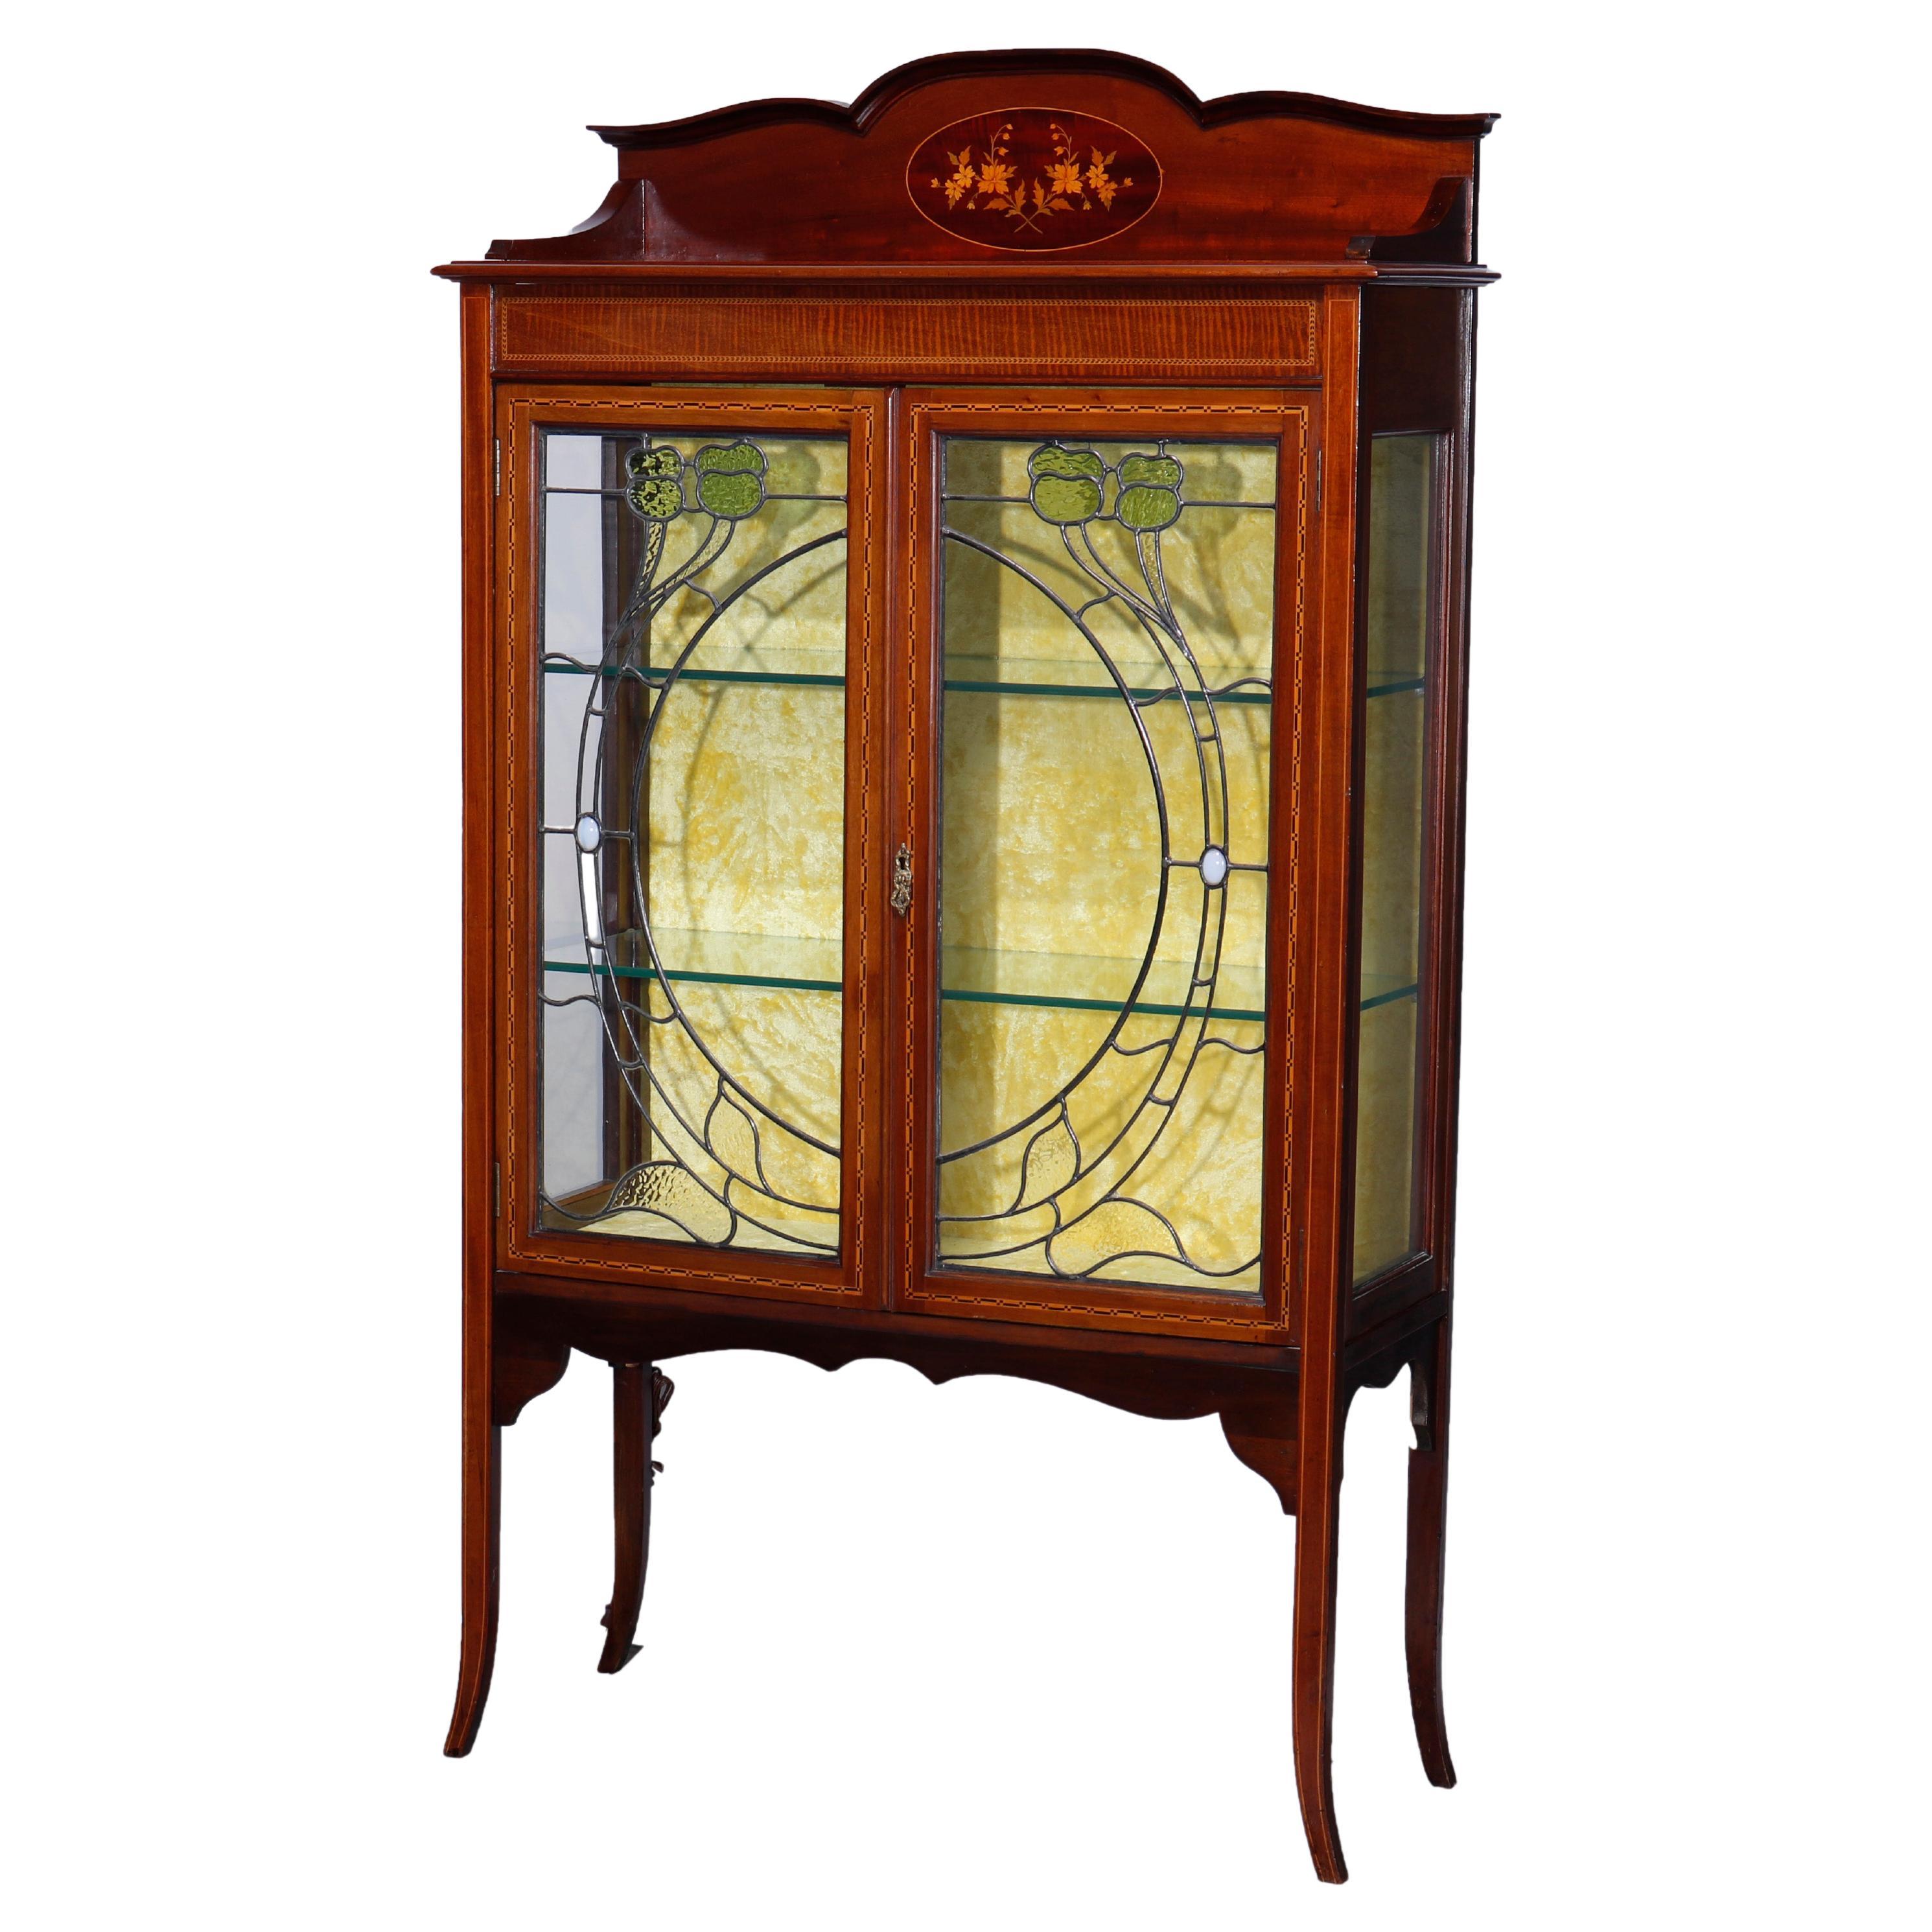 Antique Art Nouveau Marquetry Inlaid Floral Leaded Glass China Cabinet, c1900